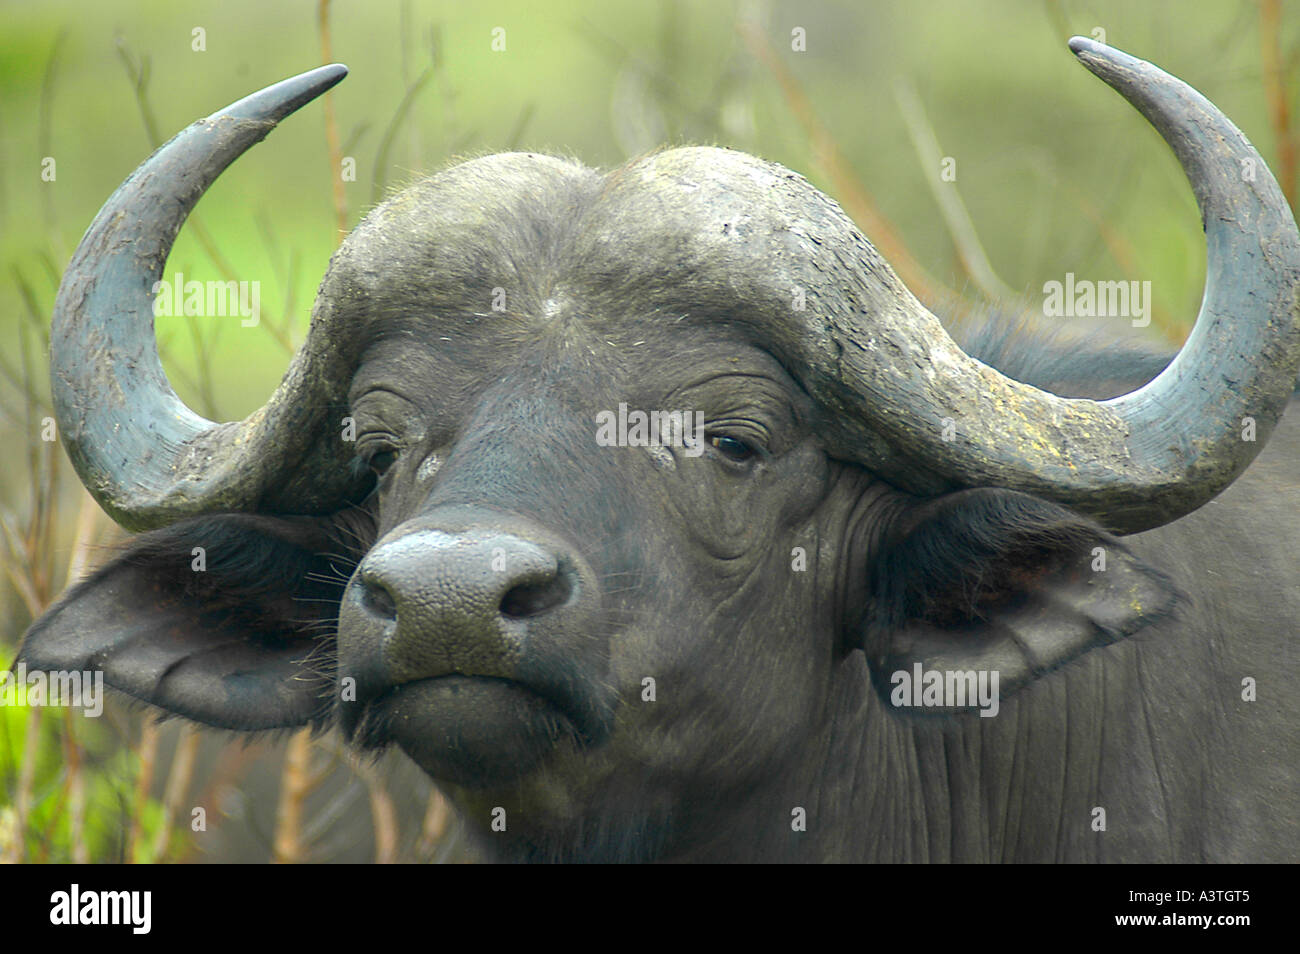 cheeky buffalo bull eying the camera These animals are extremely dangerous and pugnacious when disturbed Stock Photo